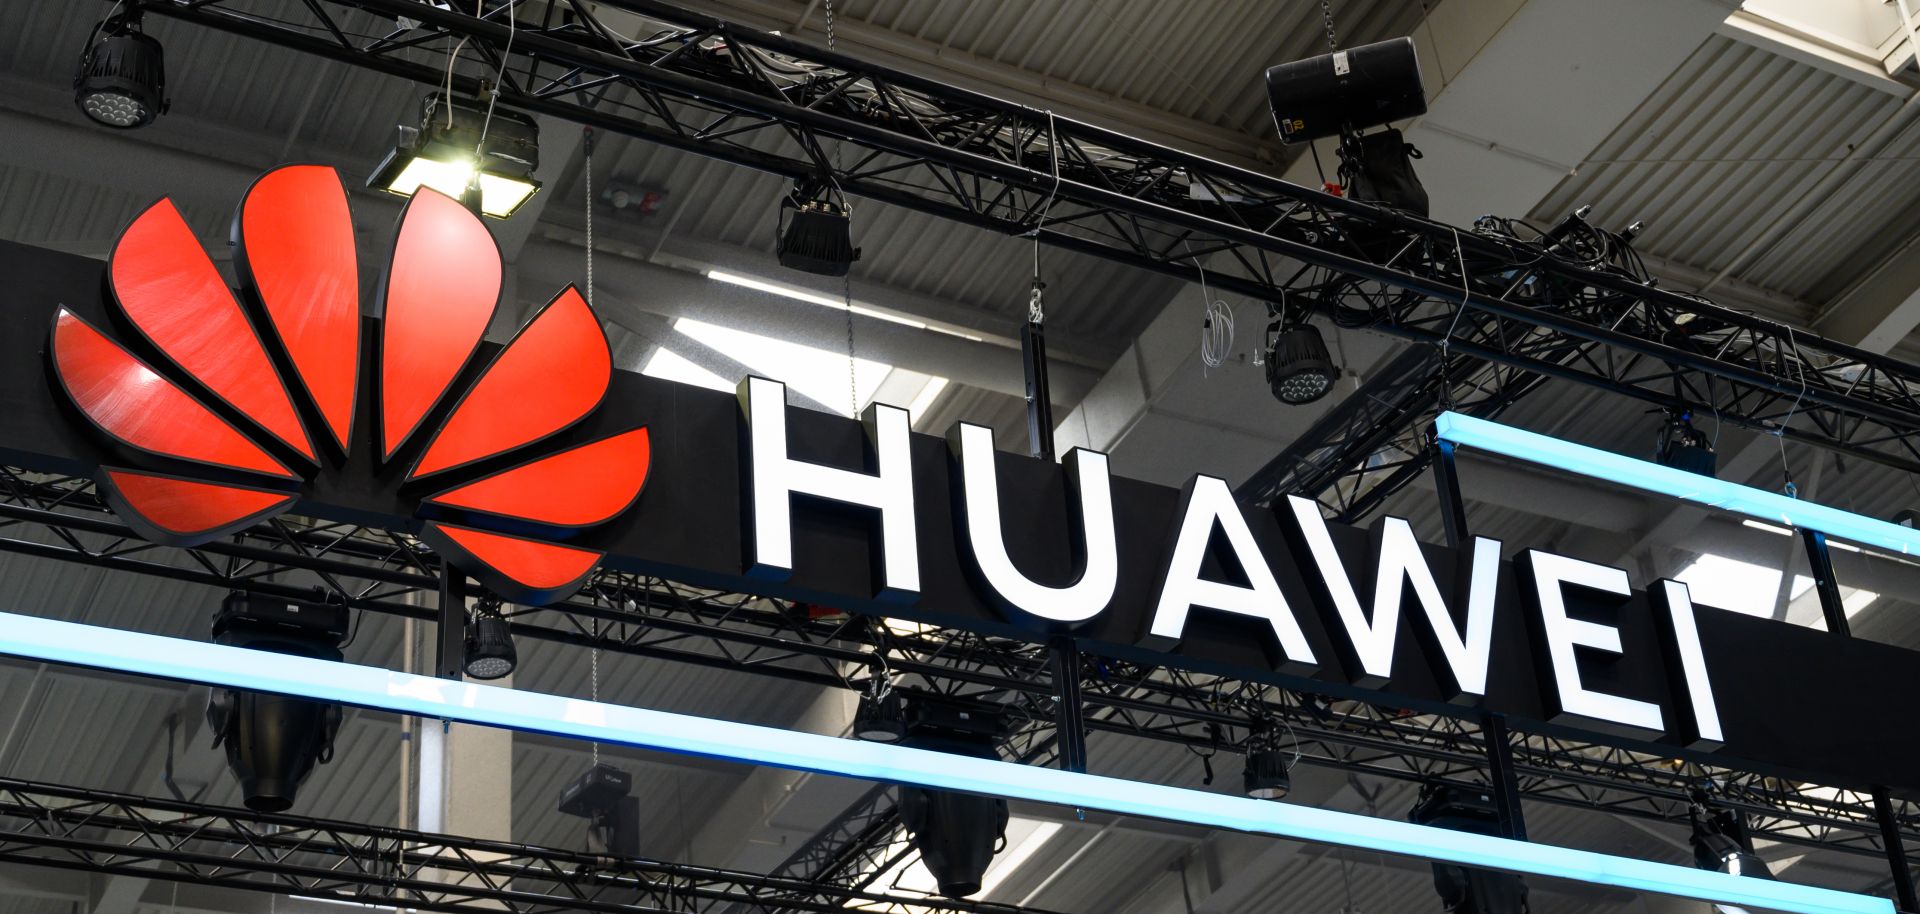 The Huawei logo, on display at the annual Hanover industrial fair in Germany, April 1-5, 2019.